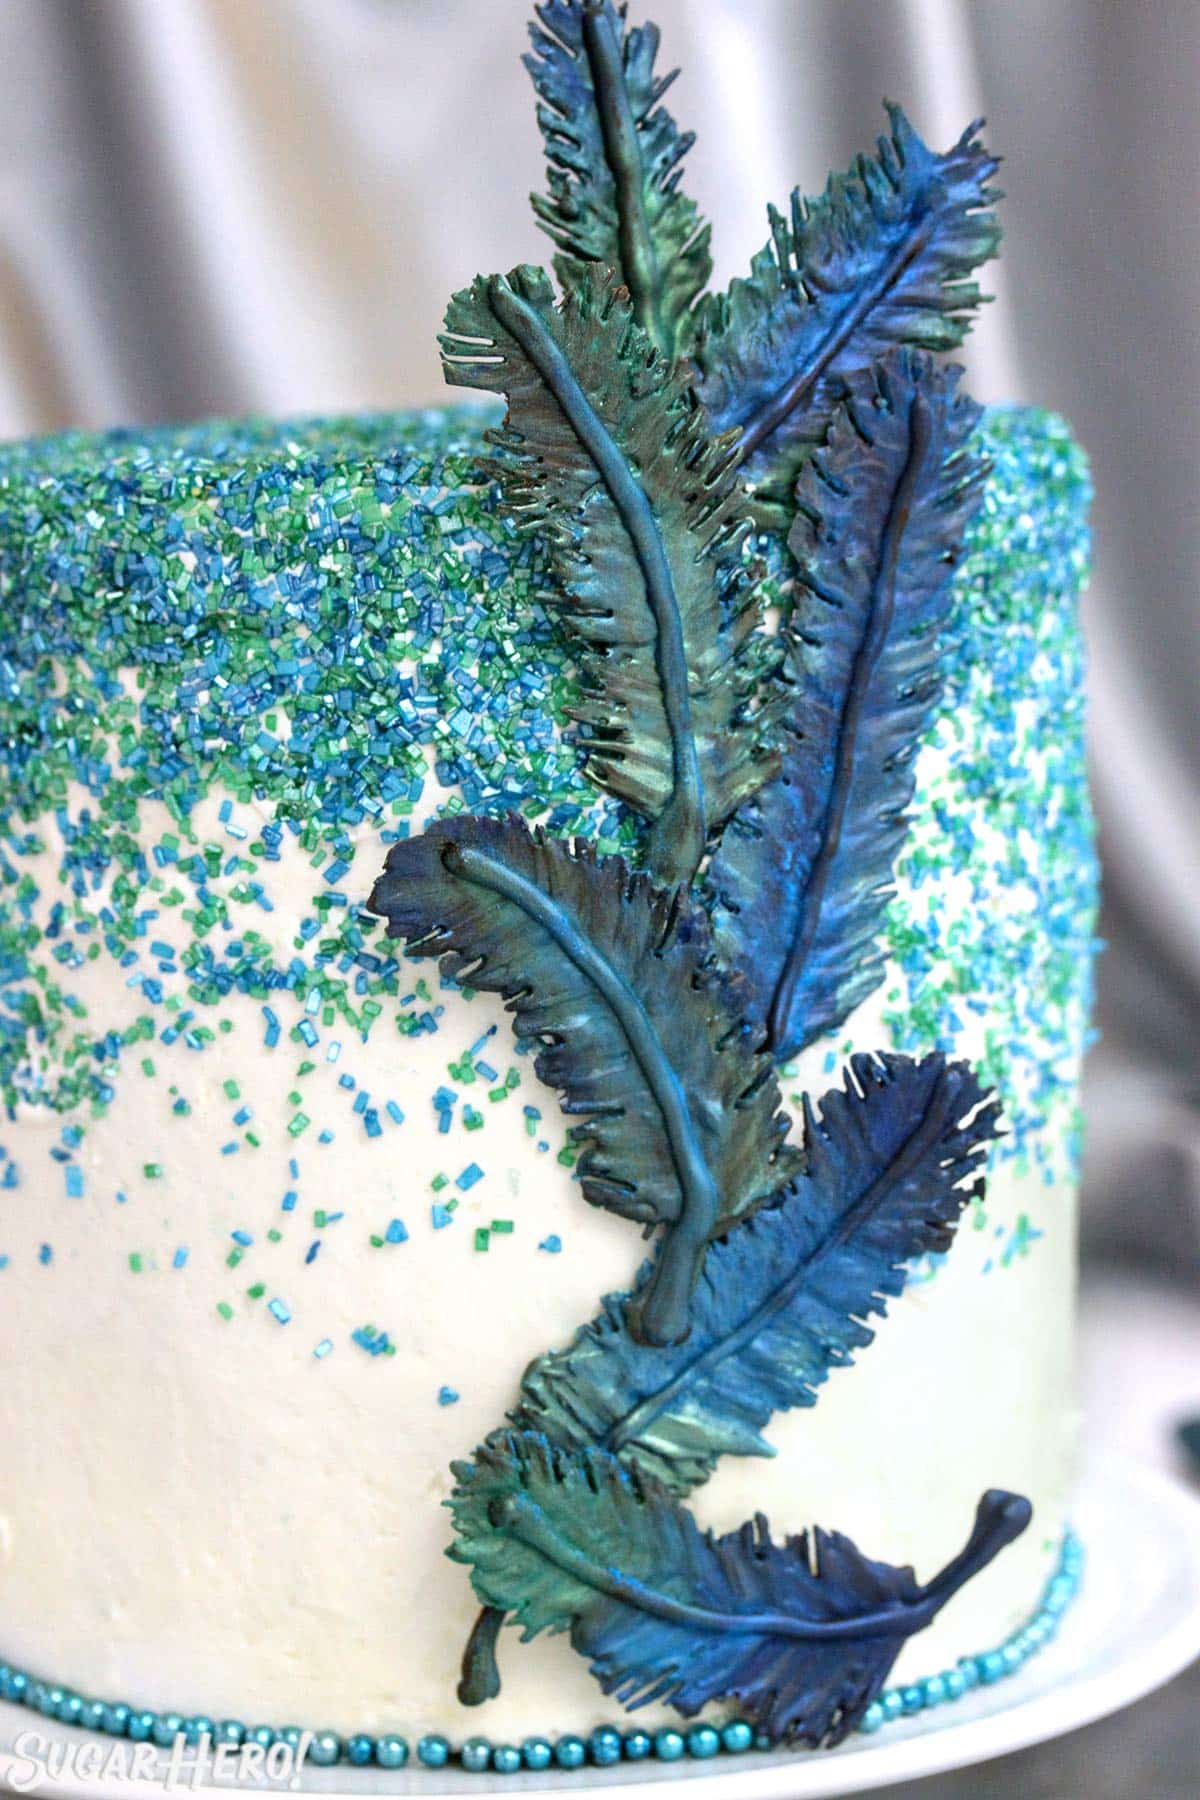 Cake with blue and green sprinkles and chocolate feather decorations.